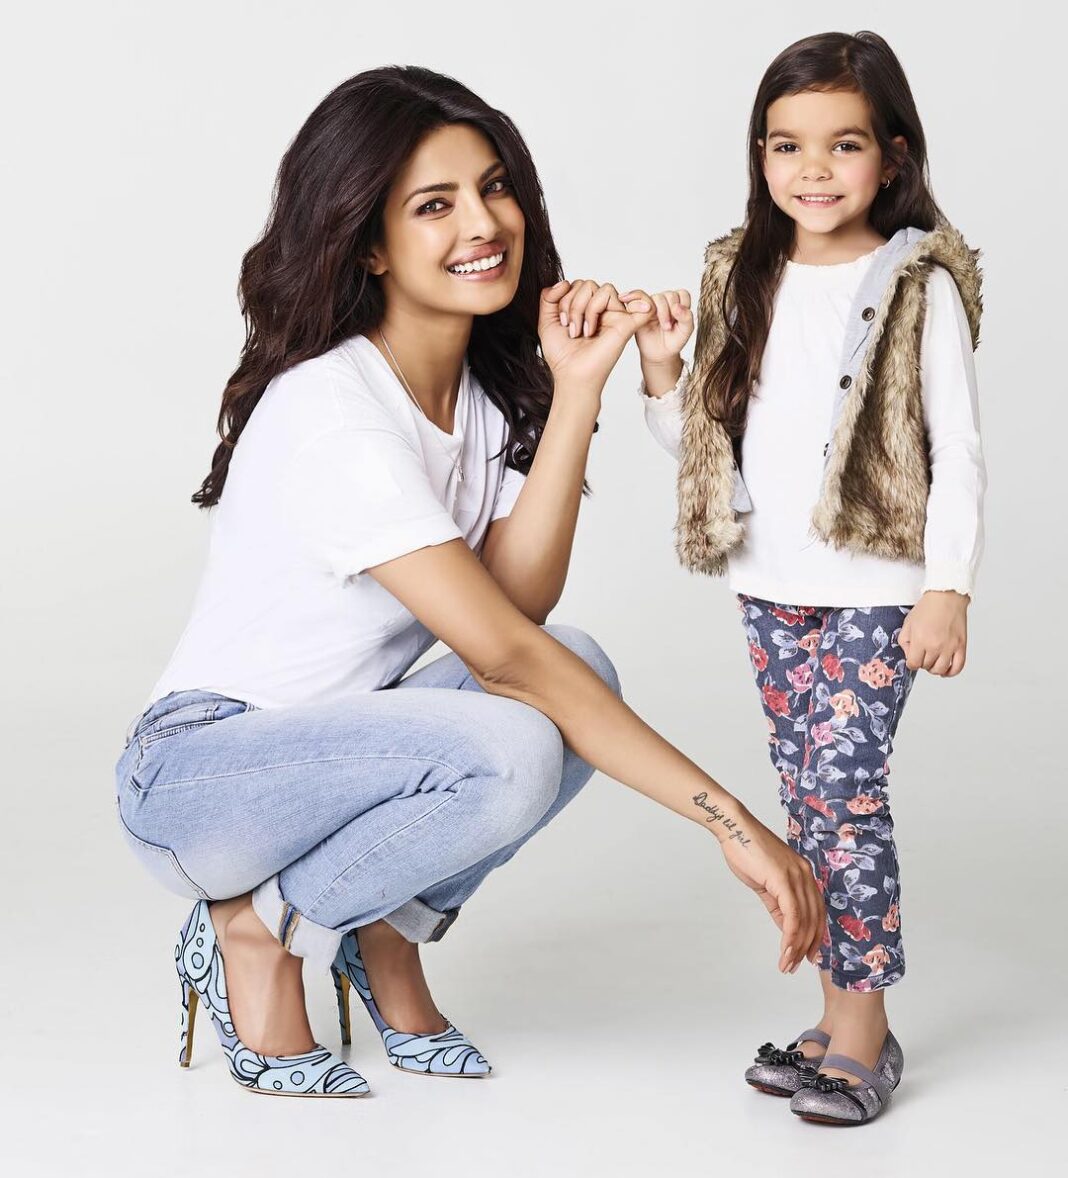 Priyanka Chopra Instagram - This lil cutie Sofia and I #MAKEAPROMISE to help children in urgent need. Too many children of this world are at risk with exposure to conflicts, diseases and natural disasters…they need us. There are many ways to lend us your support: Buy the Silver Lockit in Louis Vuitton stores and $200 will be donated to #UNICEF, do a 'Pinky Promise' - link your pinky with someone you love/admire and post it with #MAKEAPROMISE, or join us now and donate on www.louisvuitton.com/lvforunicef @louisvuitton @unicef  #makeadifference #lvforunicef #louisvuitton